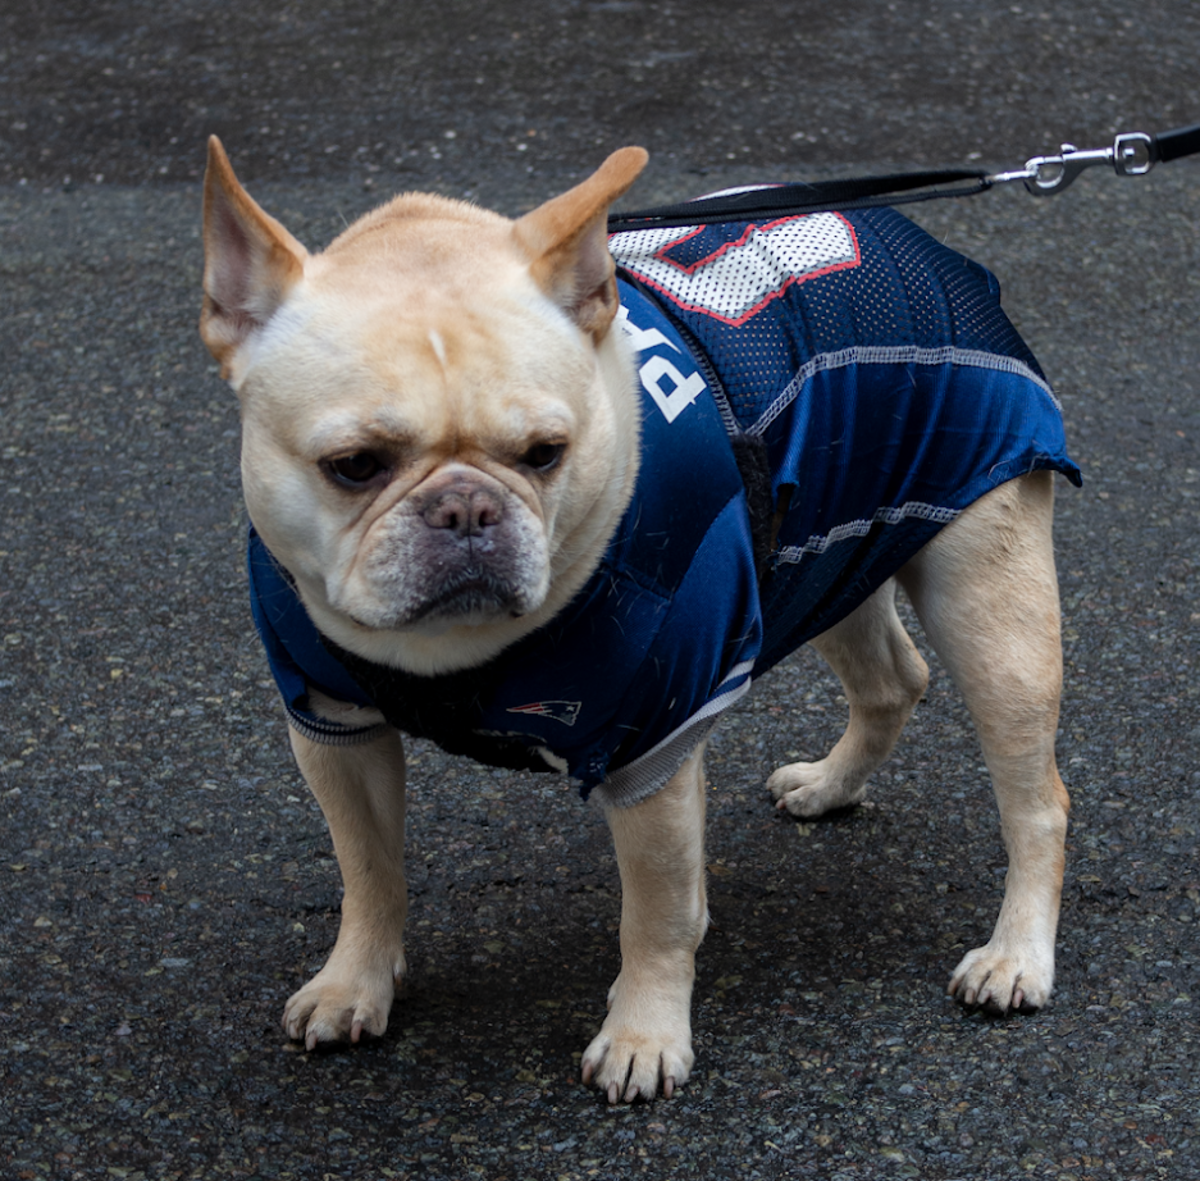 Dog in Patriot's jersey out for a walk